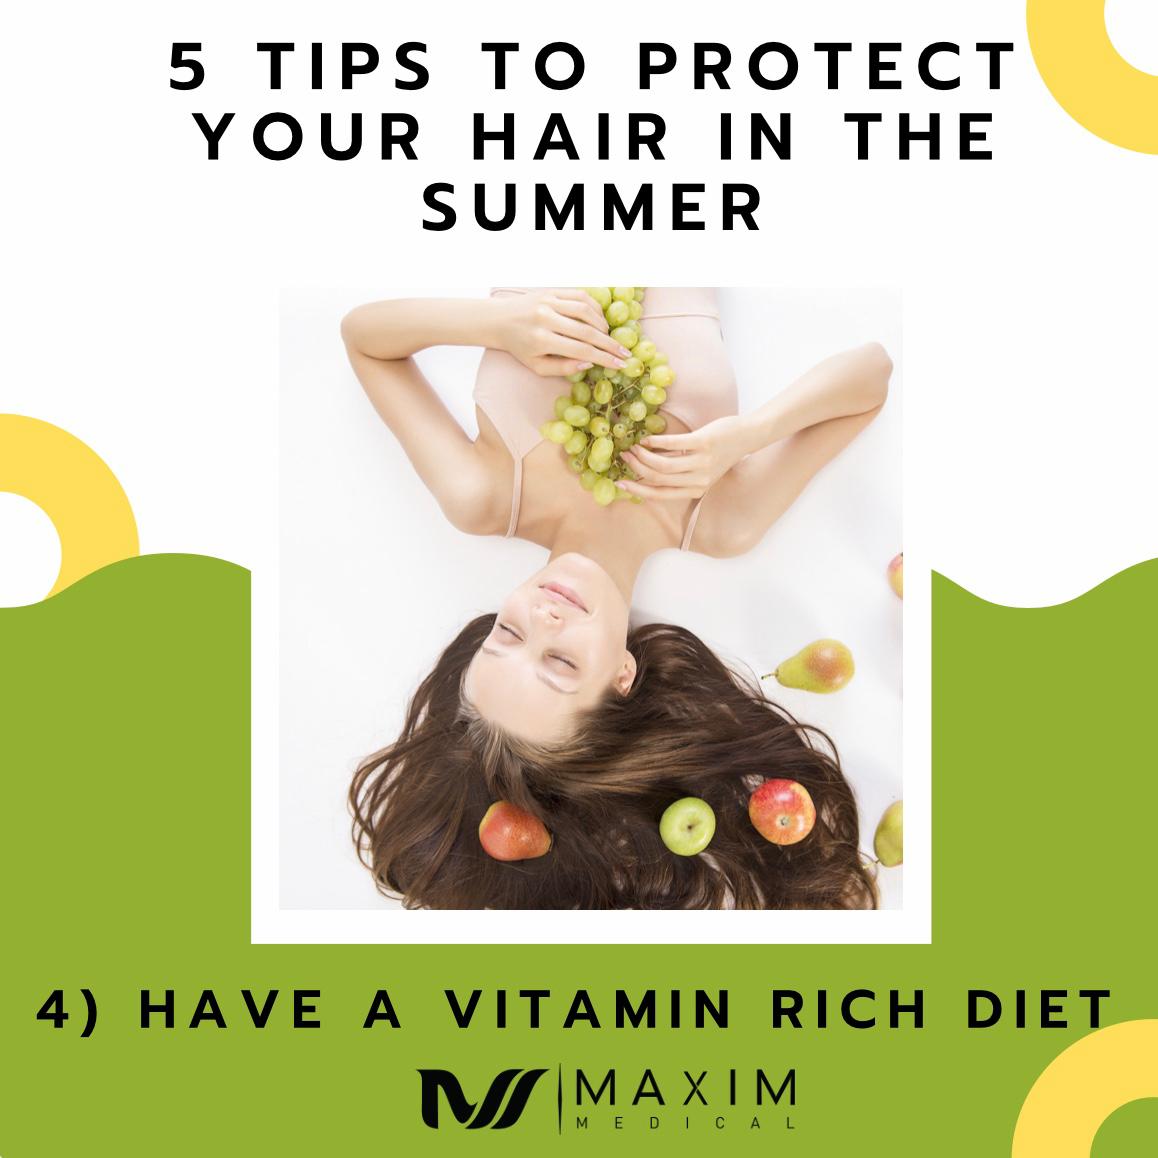 5 Tips To Protect Your Hair In The Summer

4. Include Vitamin-Rich Foods In Your Diet
The same way that a vitamin-rich diet can benefit all aspects of your body, it especially plays a role in the health of your hair. Creating a diet that is not only healthy but also contributes to healthy hair growth is not very difficult. At the end of the day, it is up to you to determine if supplemental vitamin pills/powders are also necessary. However, checking with your doctor is definitely suggested before doing so, as you may be getting enough from your diet. If you have any questions regarding hair loss solutions or any of our other services, feel free to contact us!